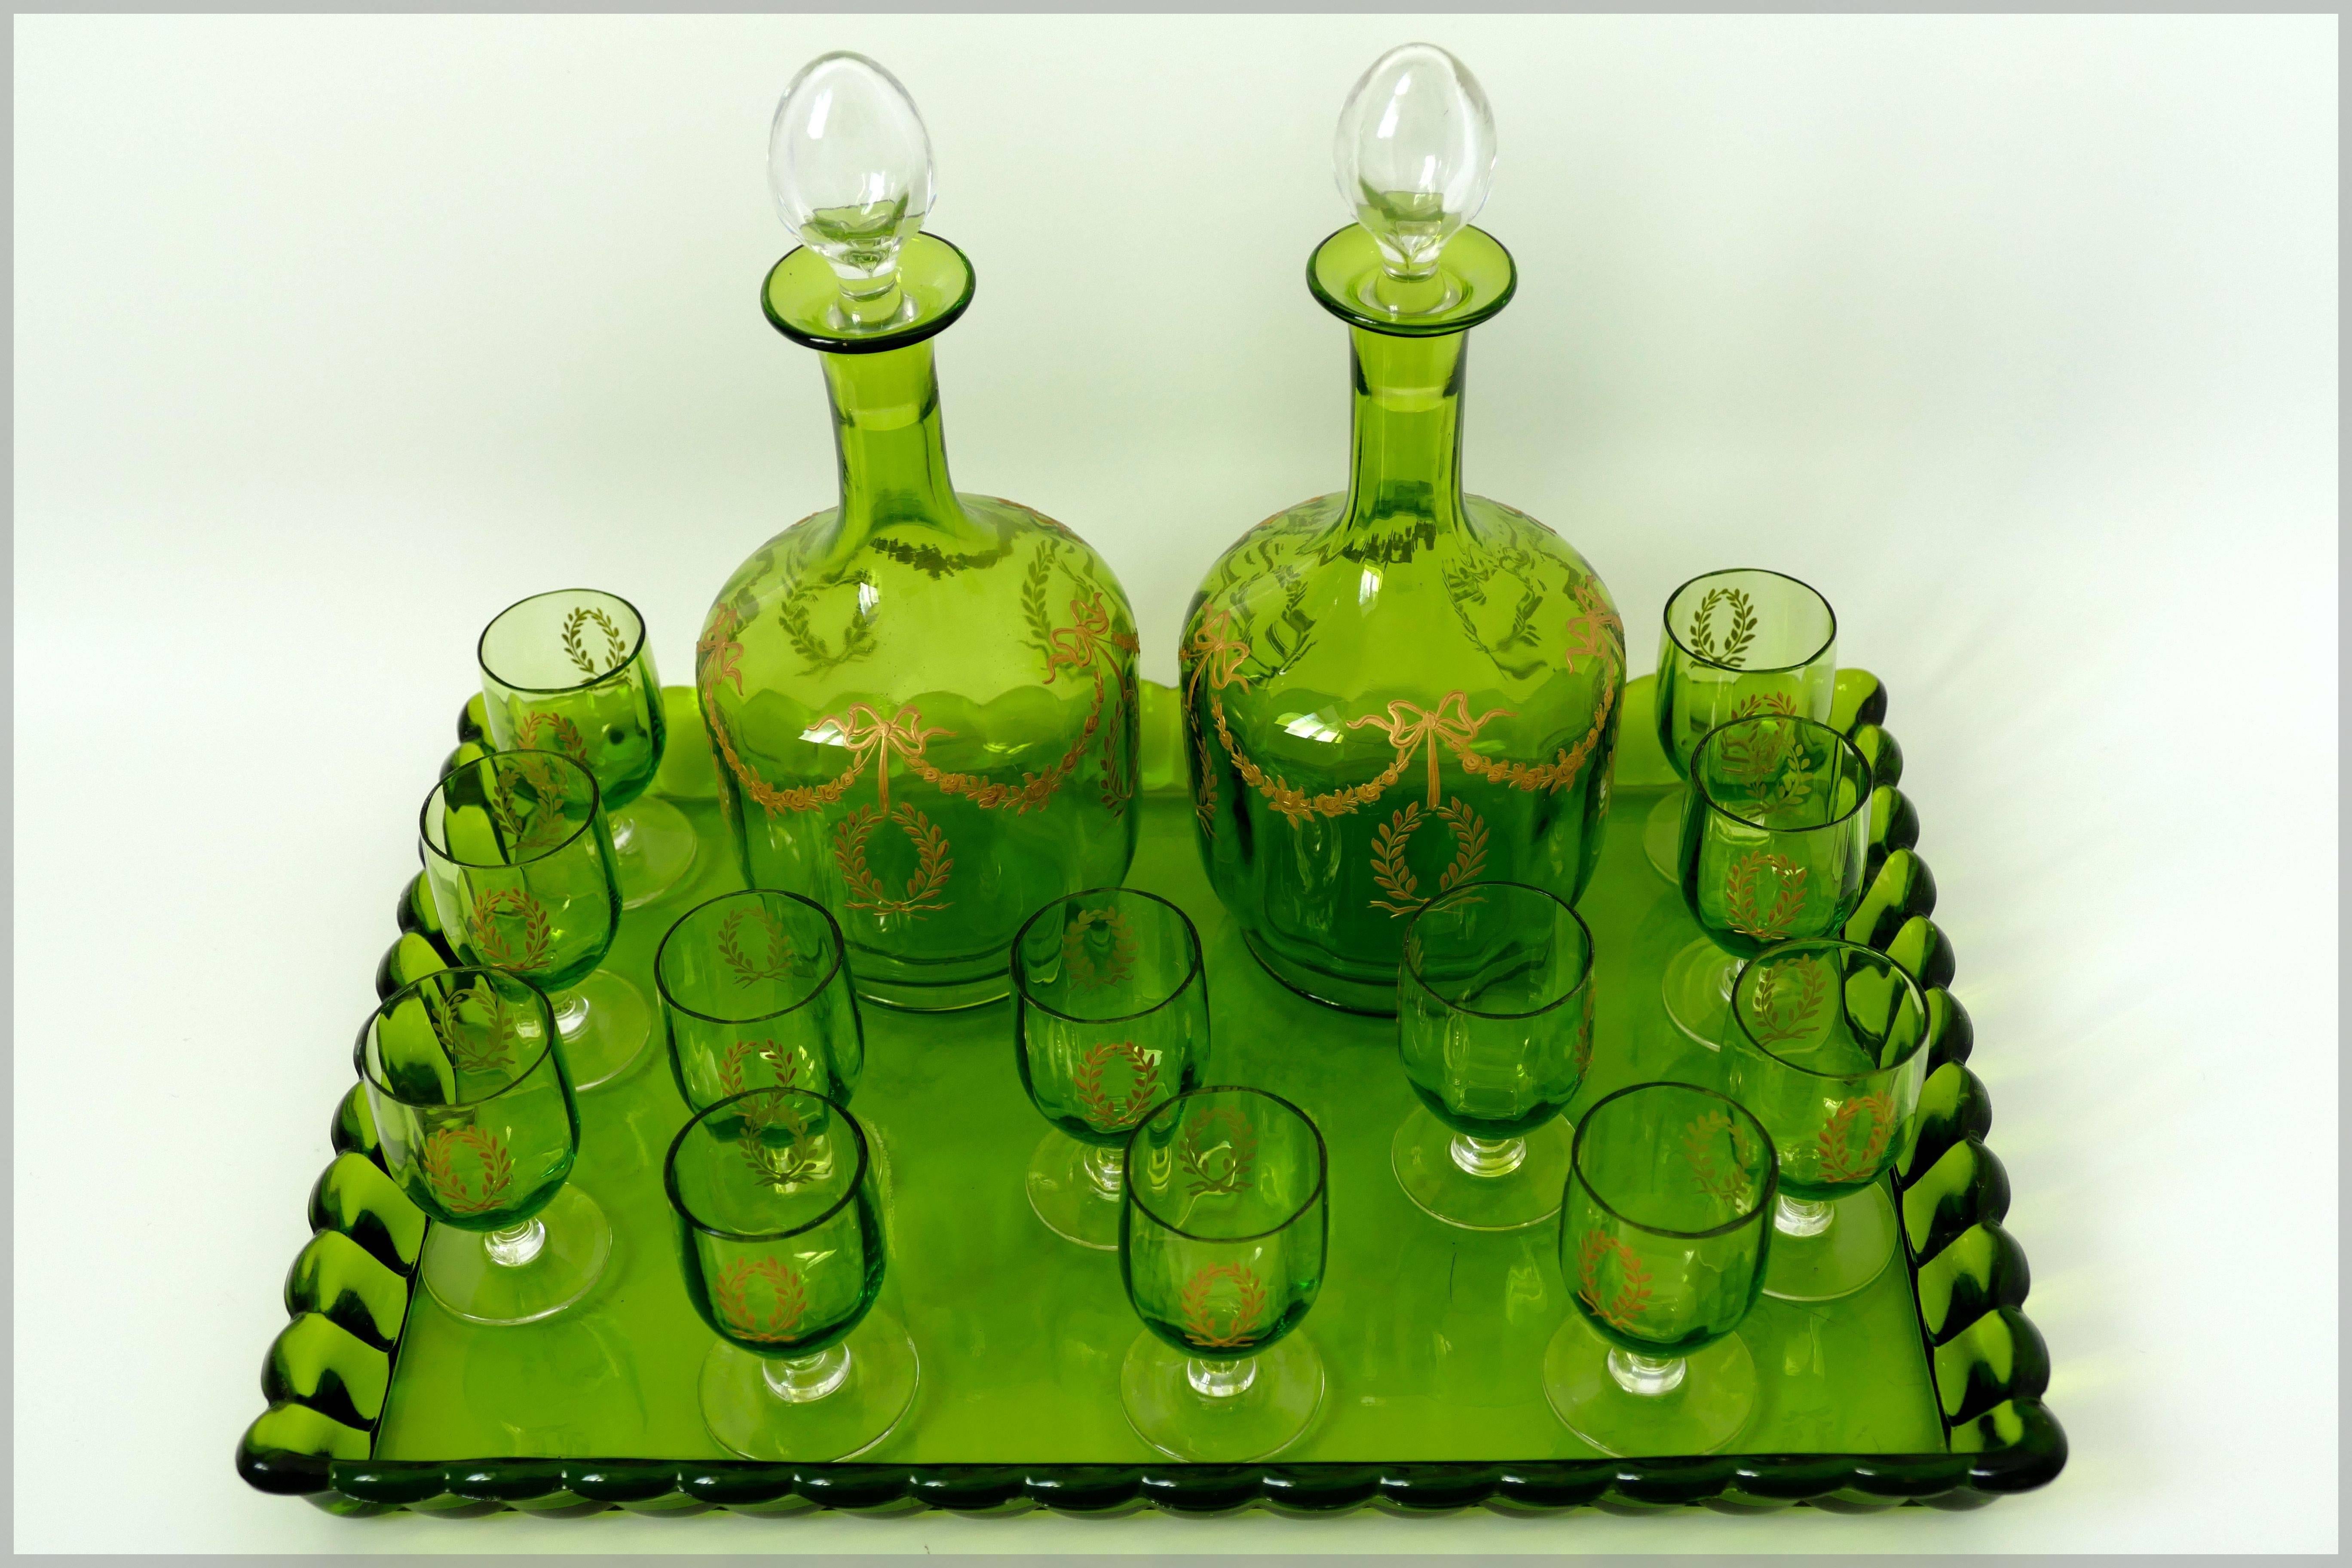 Early 20th Century 1900 Rare Baccarat Gold Green Chartreuse Crystal Liquor or Aperitif Service